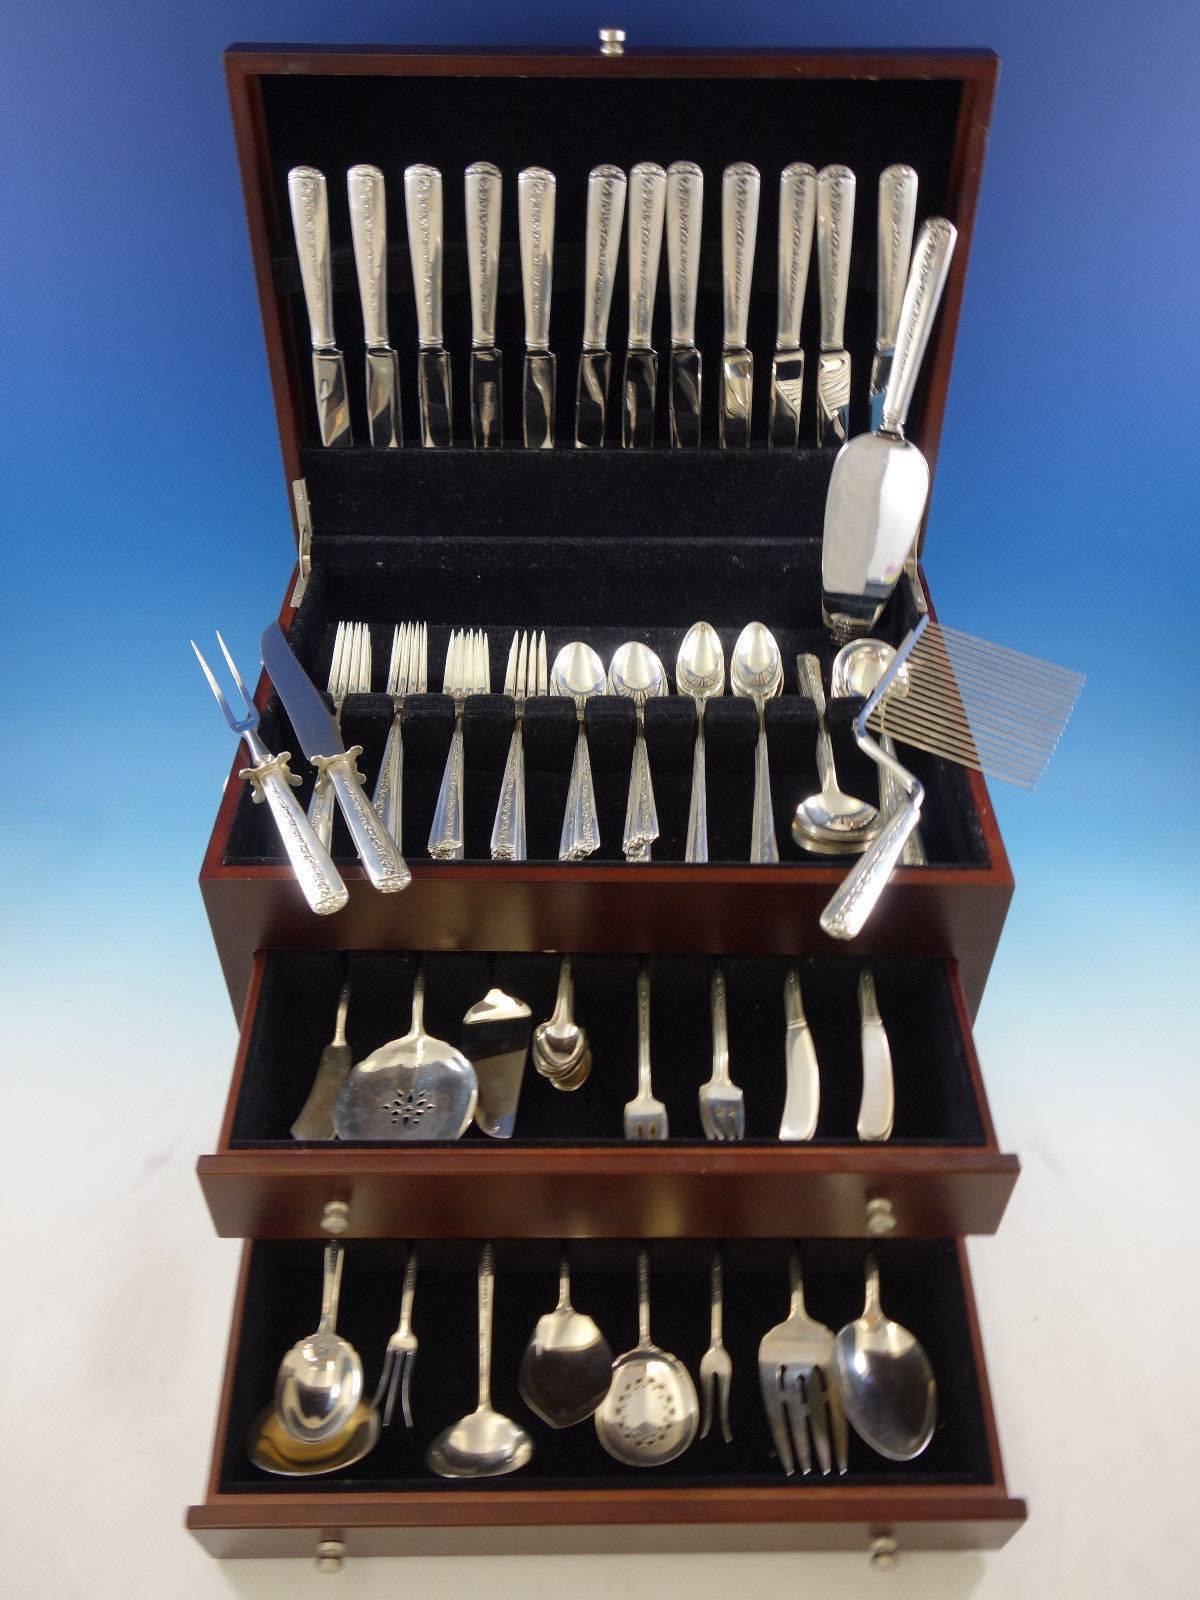 Rambler rose by Towle sterling silver flatware set, 124 pieces. This set includes: 12 knives, 8 3/4